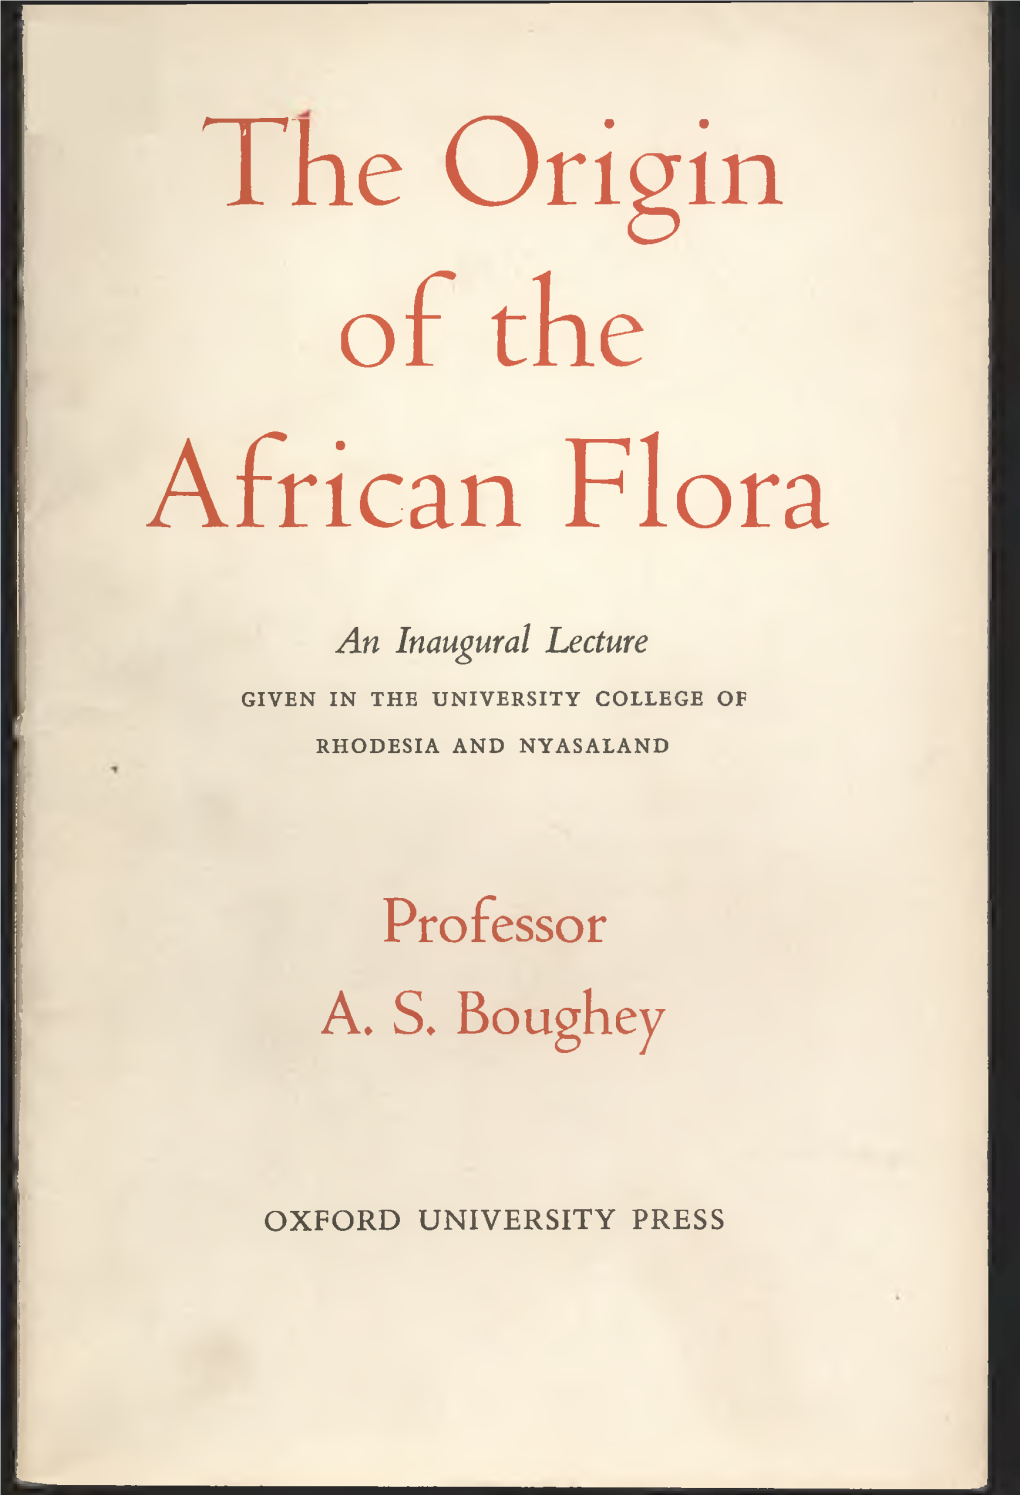 The Origin of the African Flora